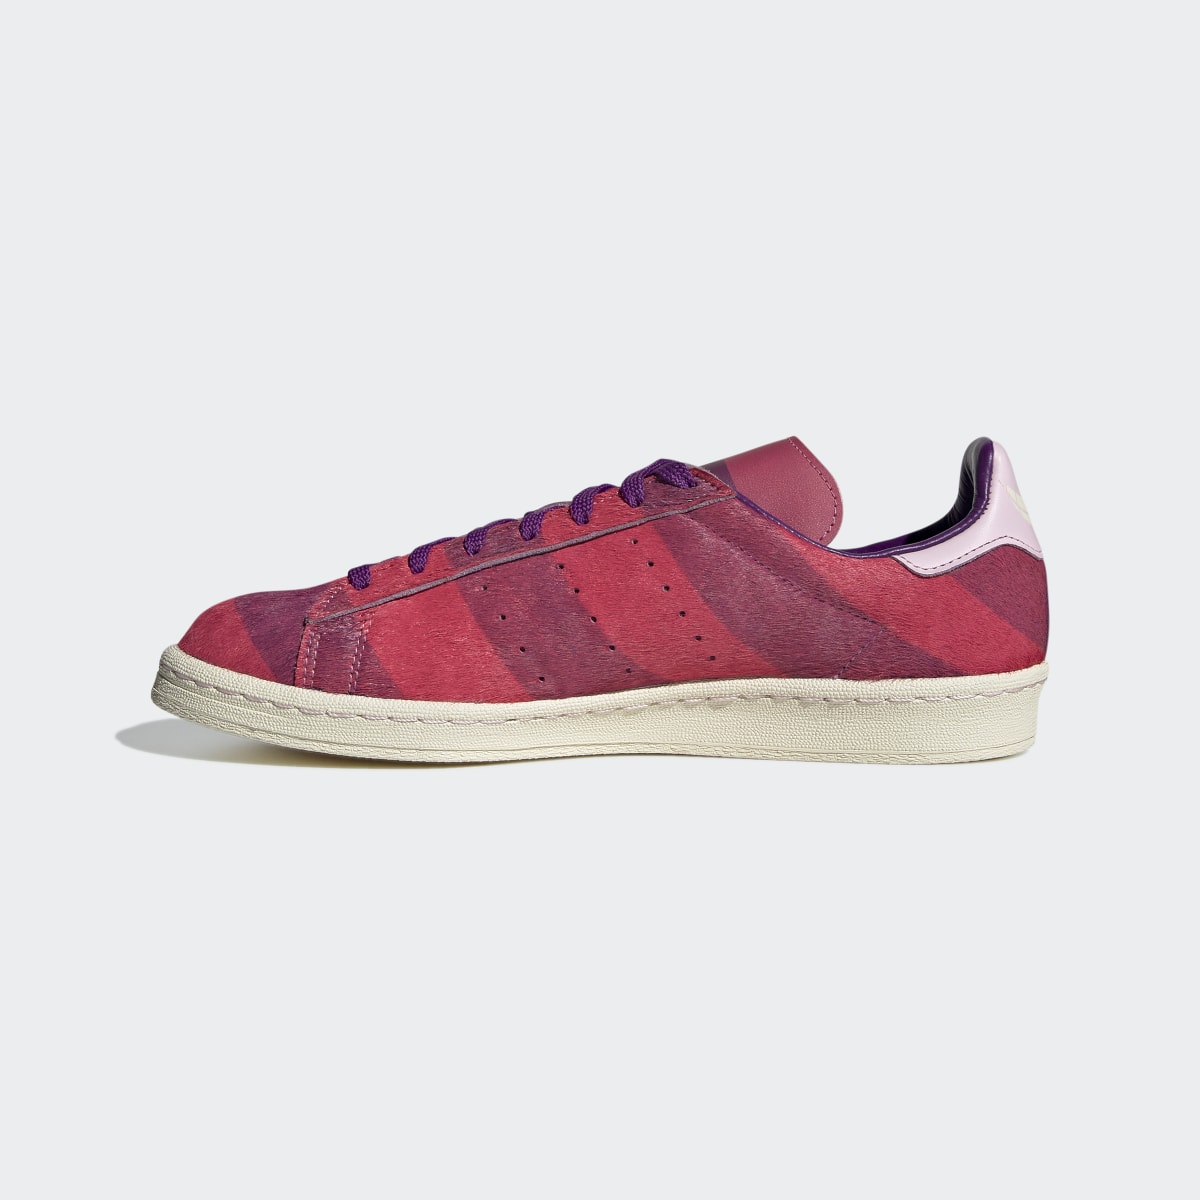 Adidas Campus 80s Cheshire Cat Shoes. 9